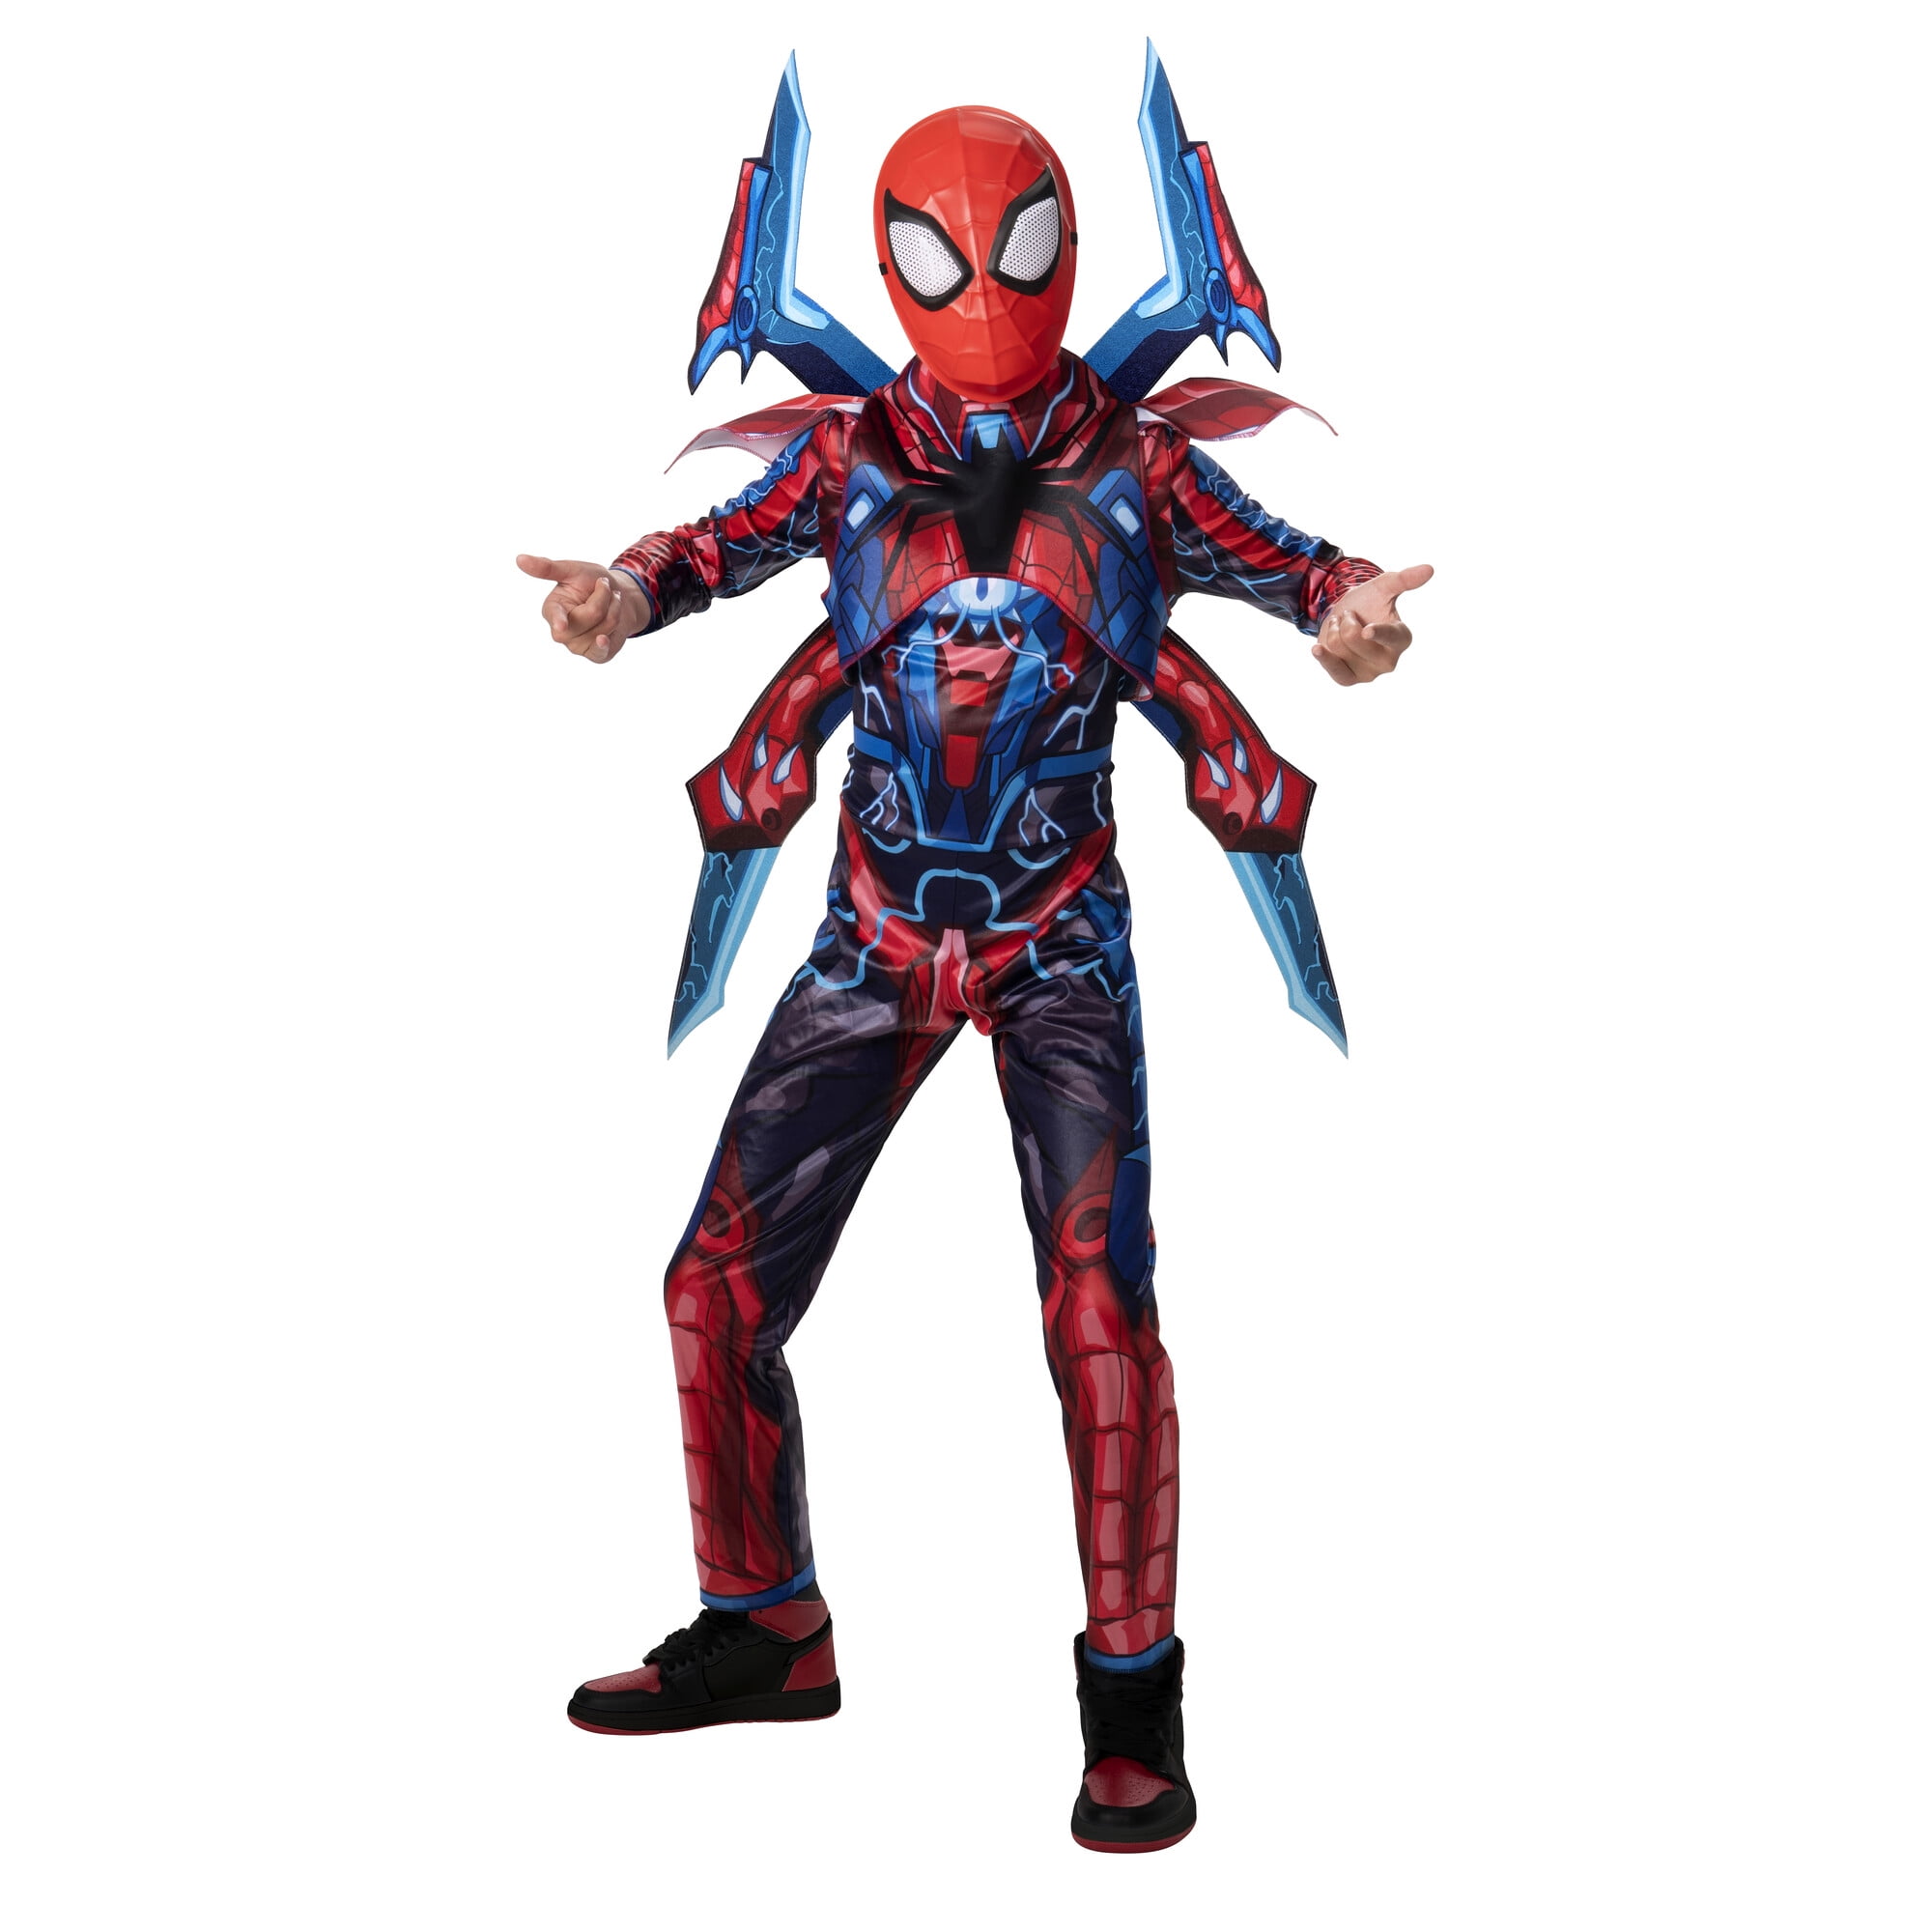 Marvel Spiderman Mech Halloween Costume Size Large. Ages 8+